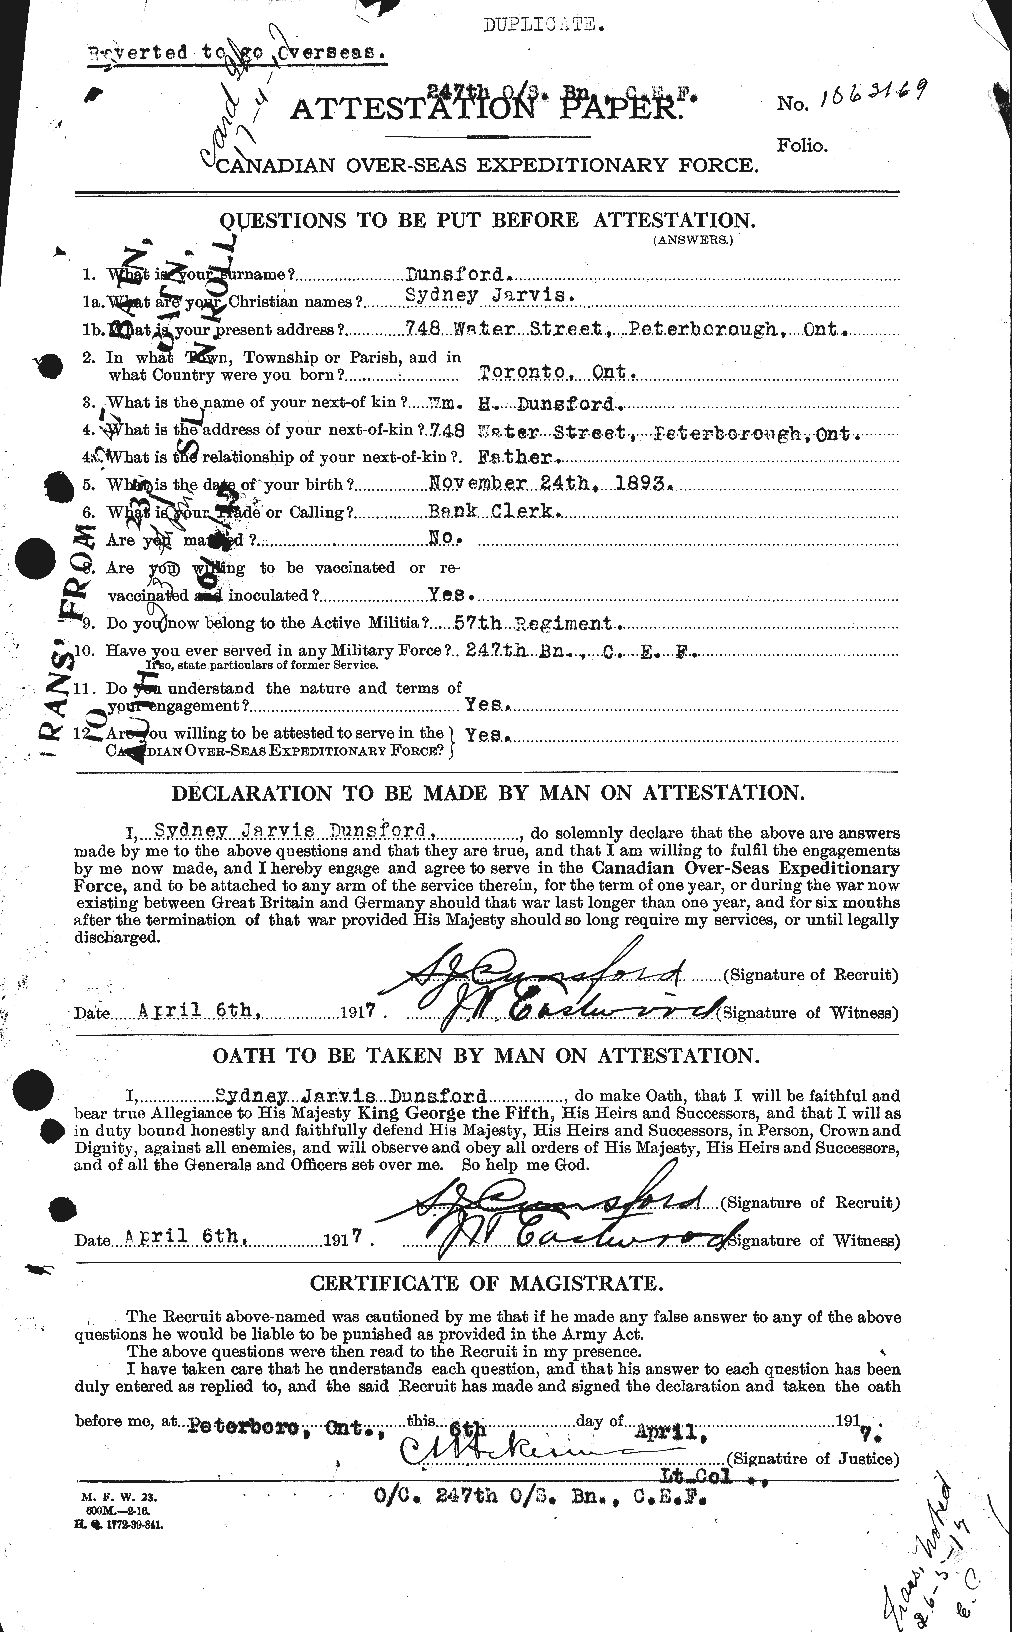 Personnel Records of the First World War - CEF 304695a